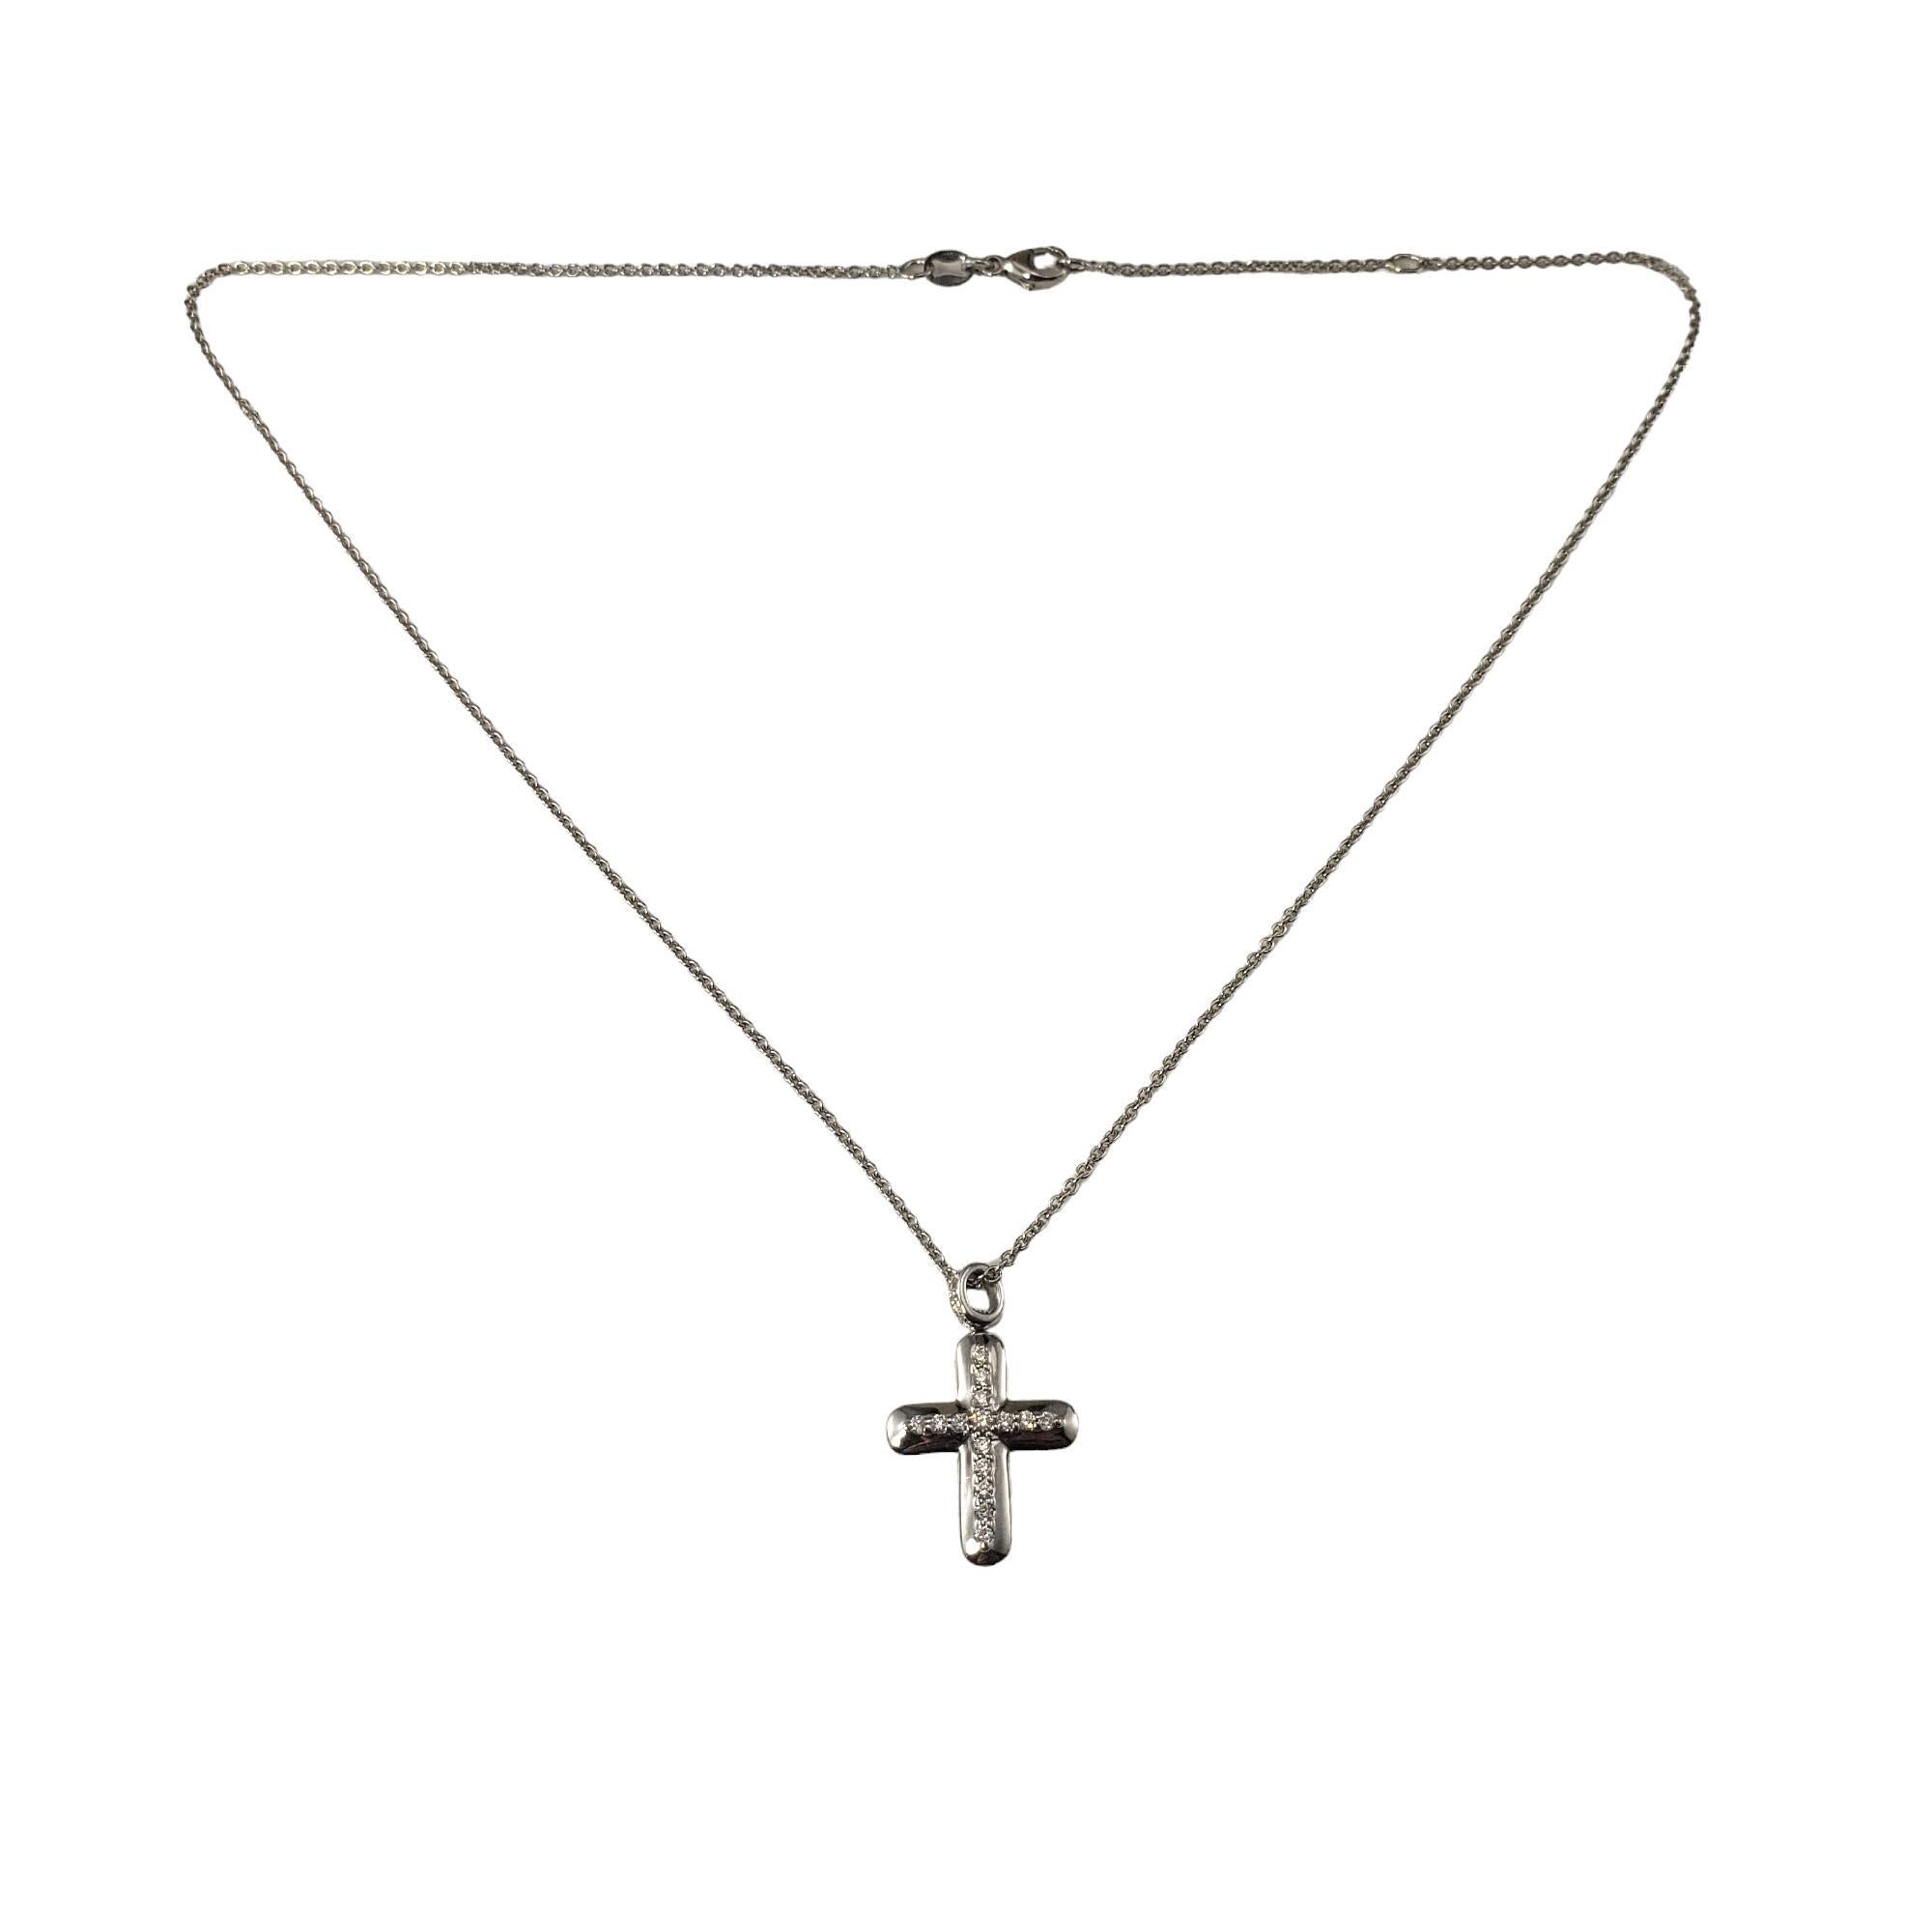 18K White Gold and Diamond Cross Pendant Necklace-

This sparkling diamond cross features 20 round brilliant cut diamonds set in 18K white gold.  Suspends from a classic cable chain.

Approximate total diamond weight: .20 ct.

Diamond color: